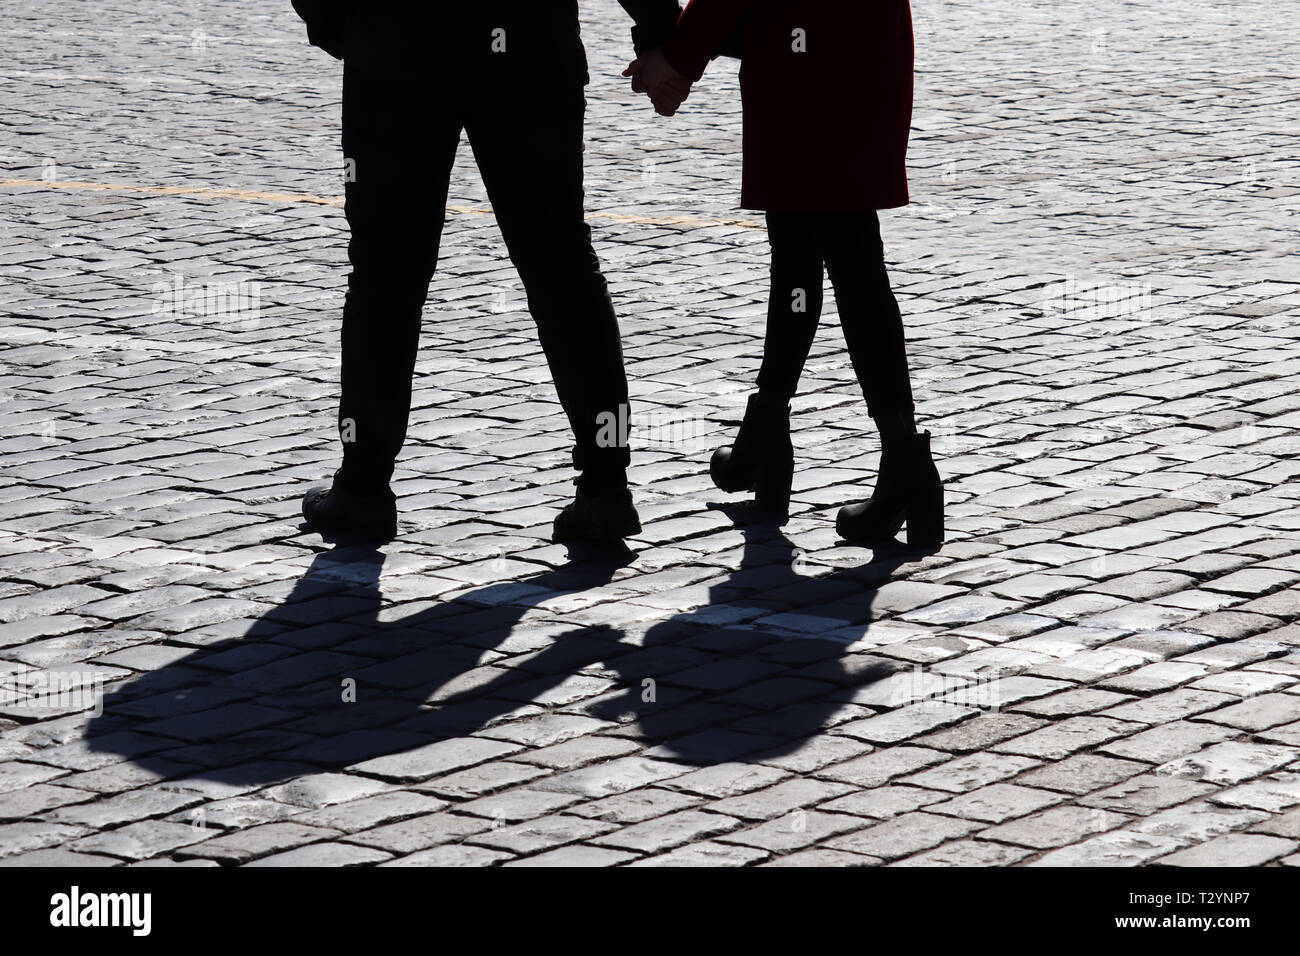 Silhouette of love couple on the street. Two people walking and holding hands, shadows on pavement, concept for romantic love, family, relationships Stock Photo